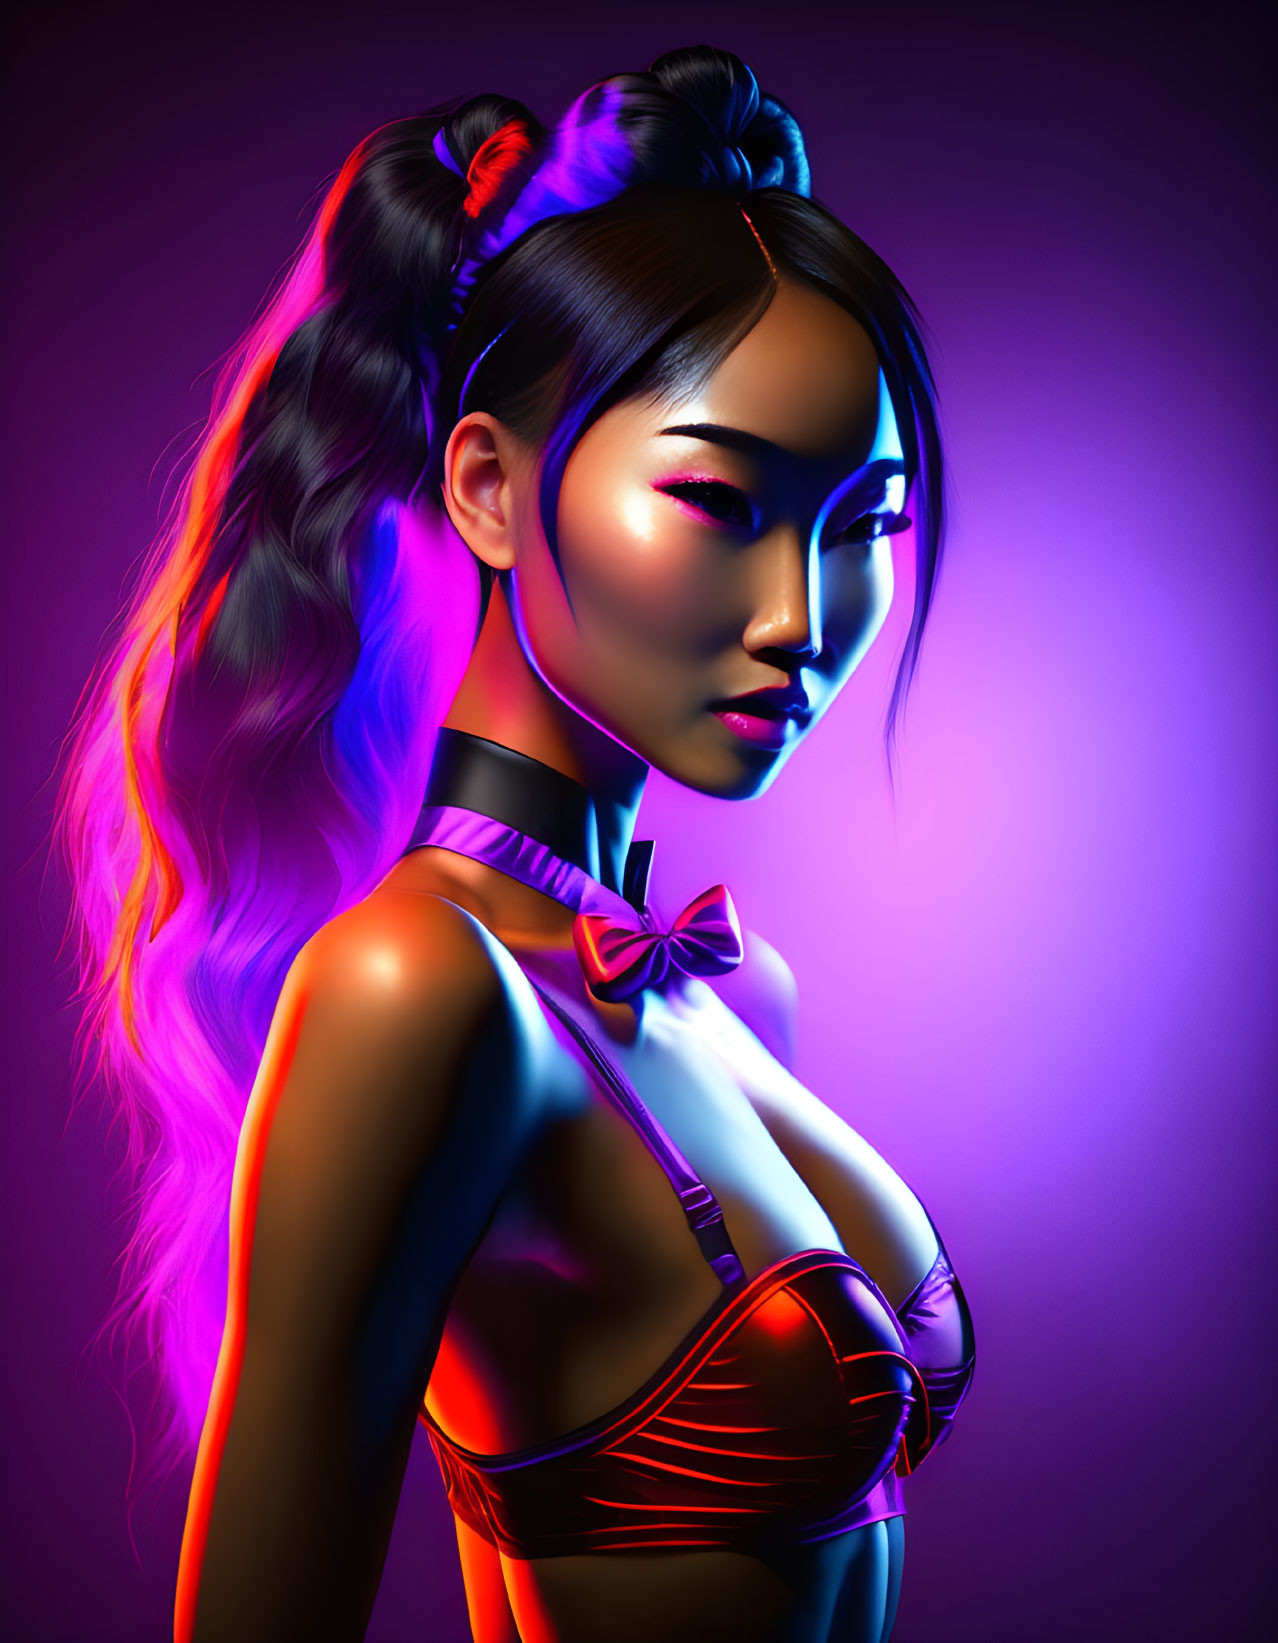 Vibrant digital artwork: woman with ponytail, bold makeup, red top, purple backdrop